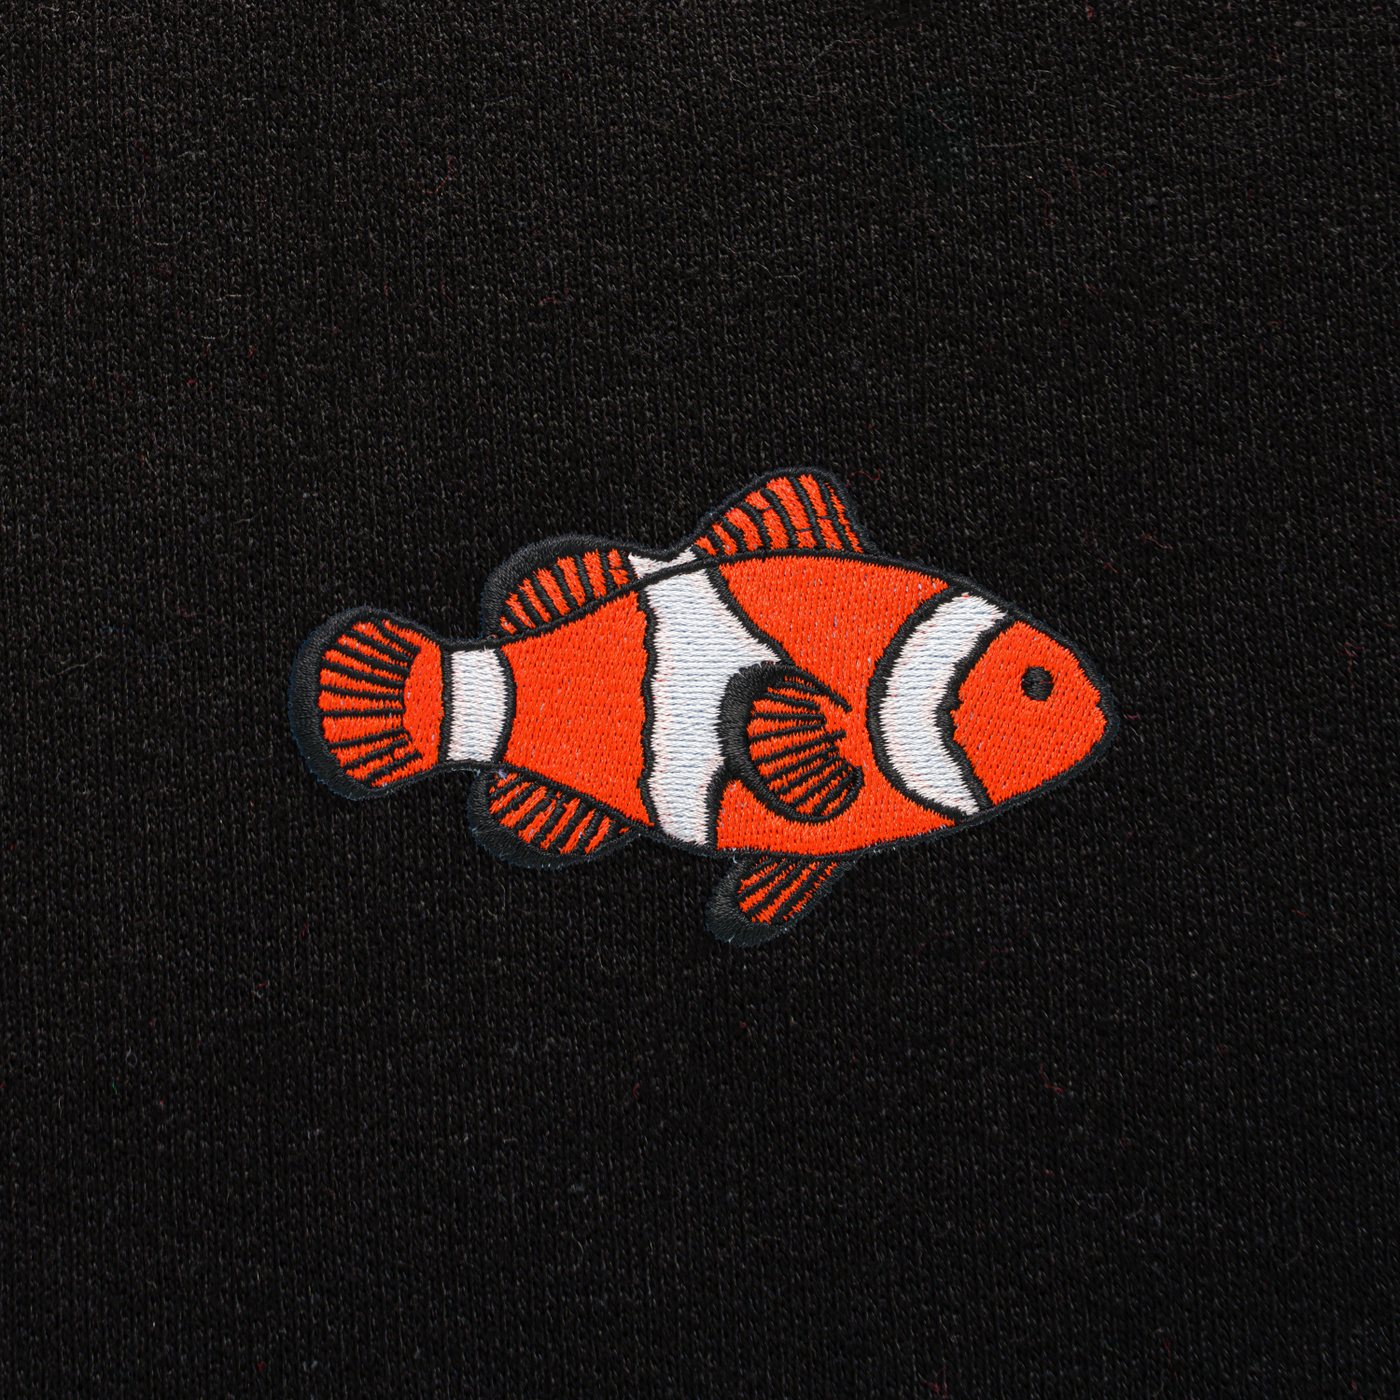 Bobby's Planet Men's Embroidered Clownfish Sweatshirt from Seven Seas Fish Animals Collection in Black Color#color_black